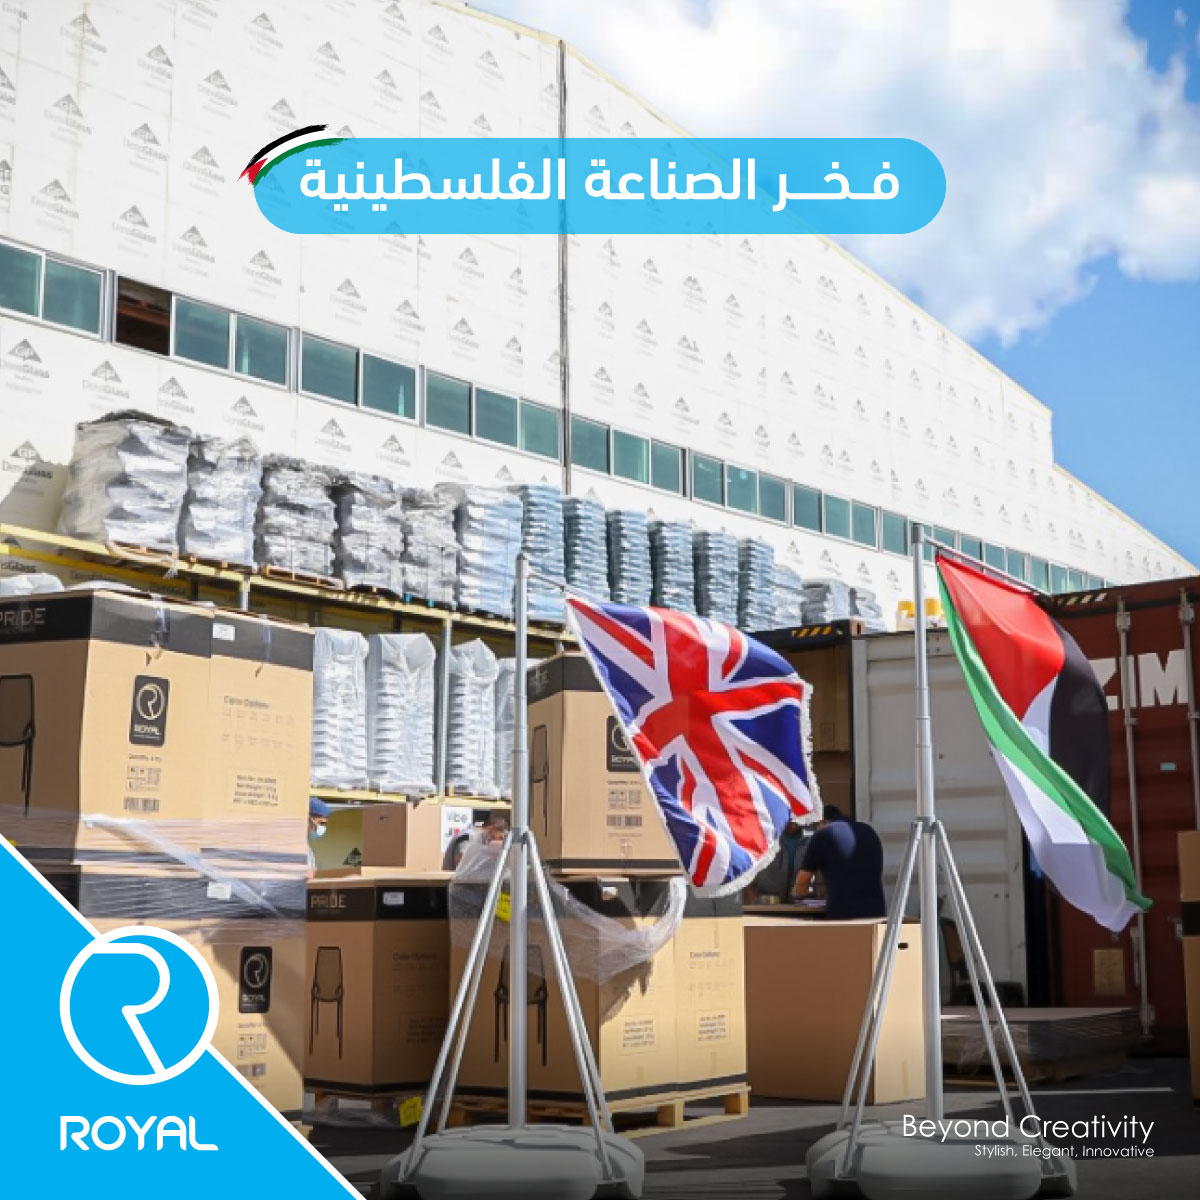 The start of exporting Royal products to Britain